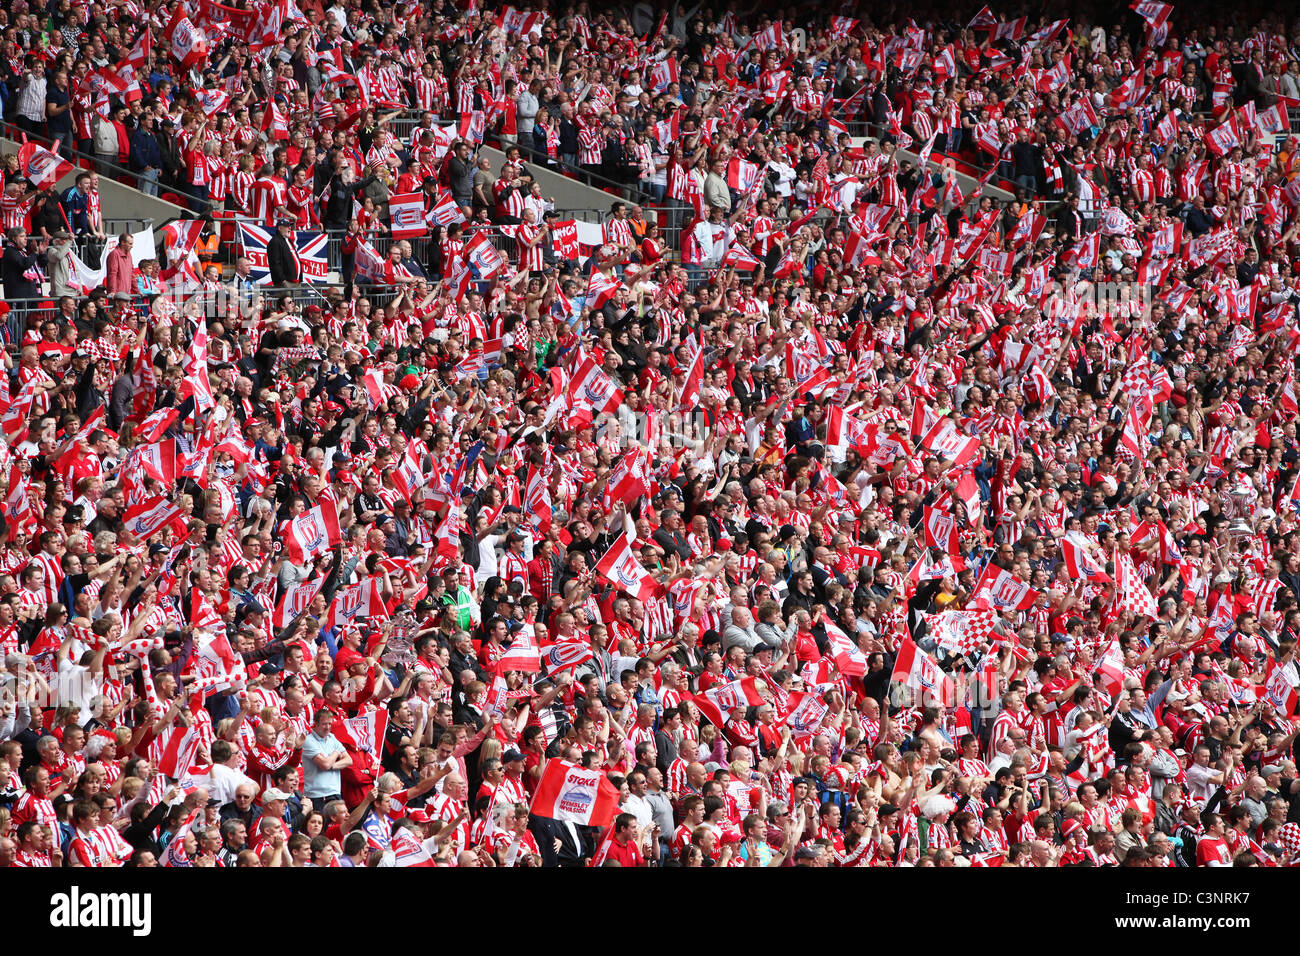 General of Stoke City fans at the FA Cup final at Wembley Picture by Mann Stock Photo - Alamy